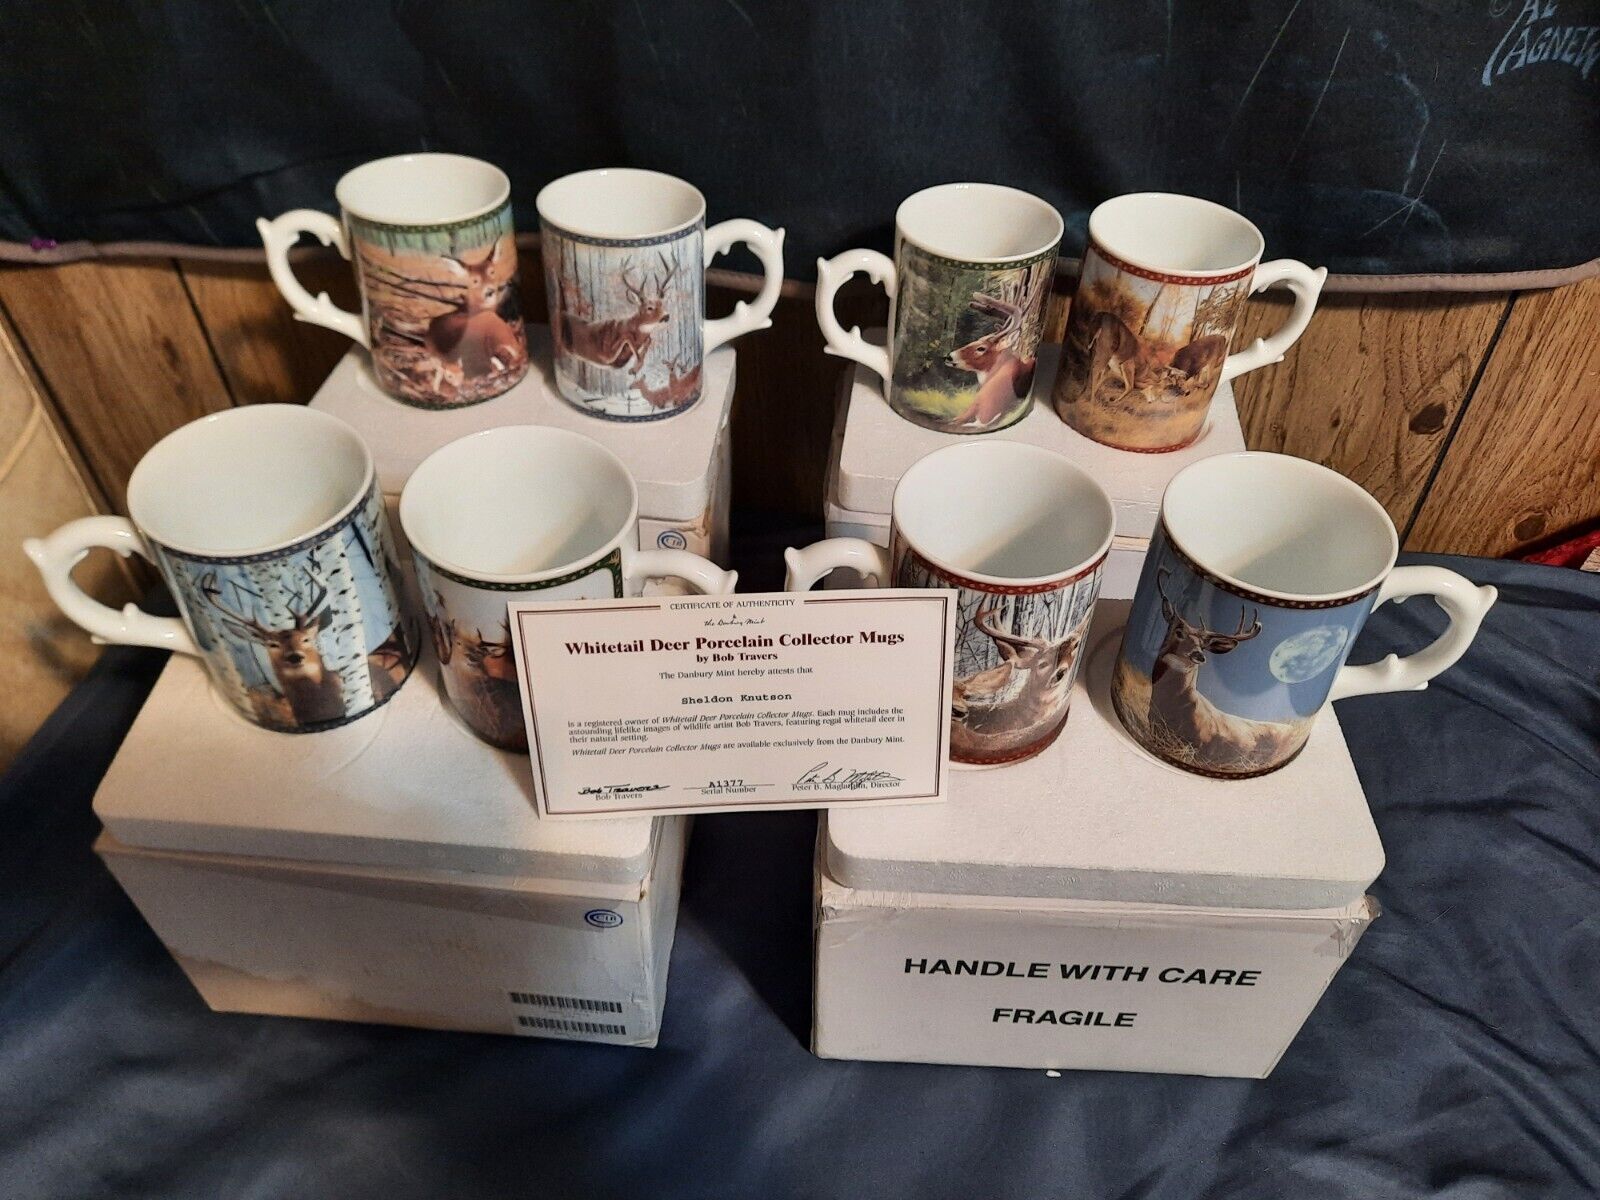 (RARE) Danbury mint Porcelain Whitetail Deer Collection Mugs Complete Set of 8